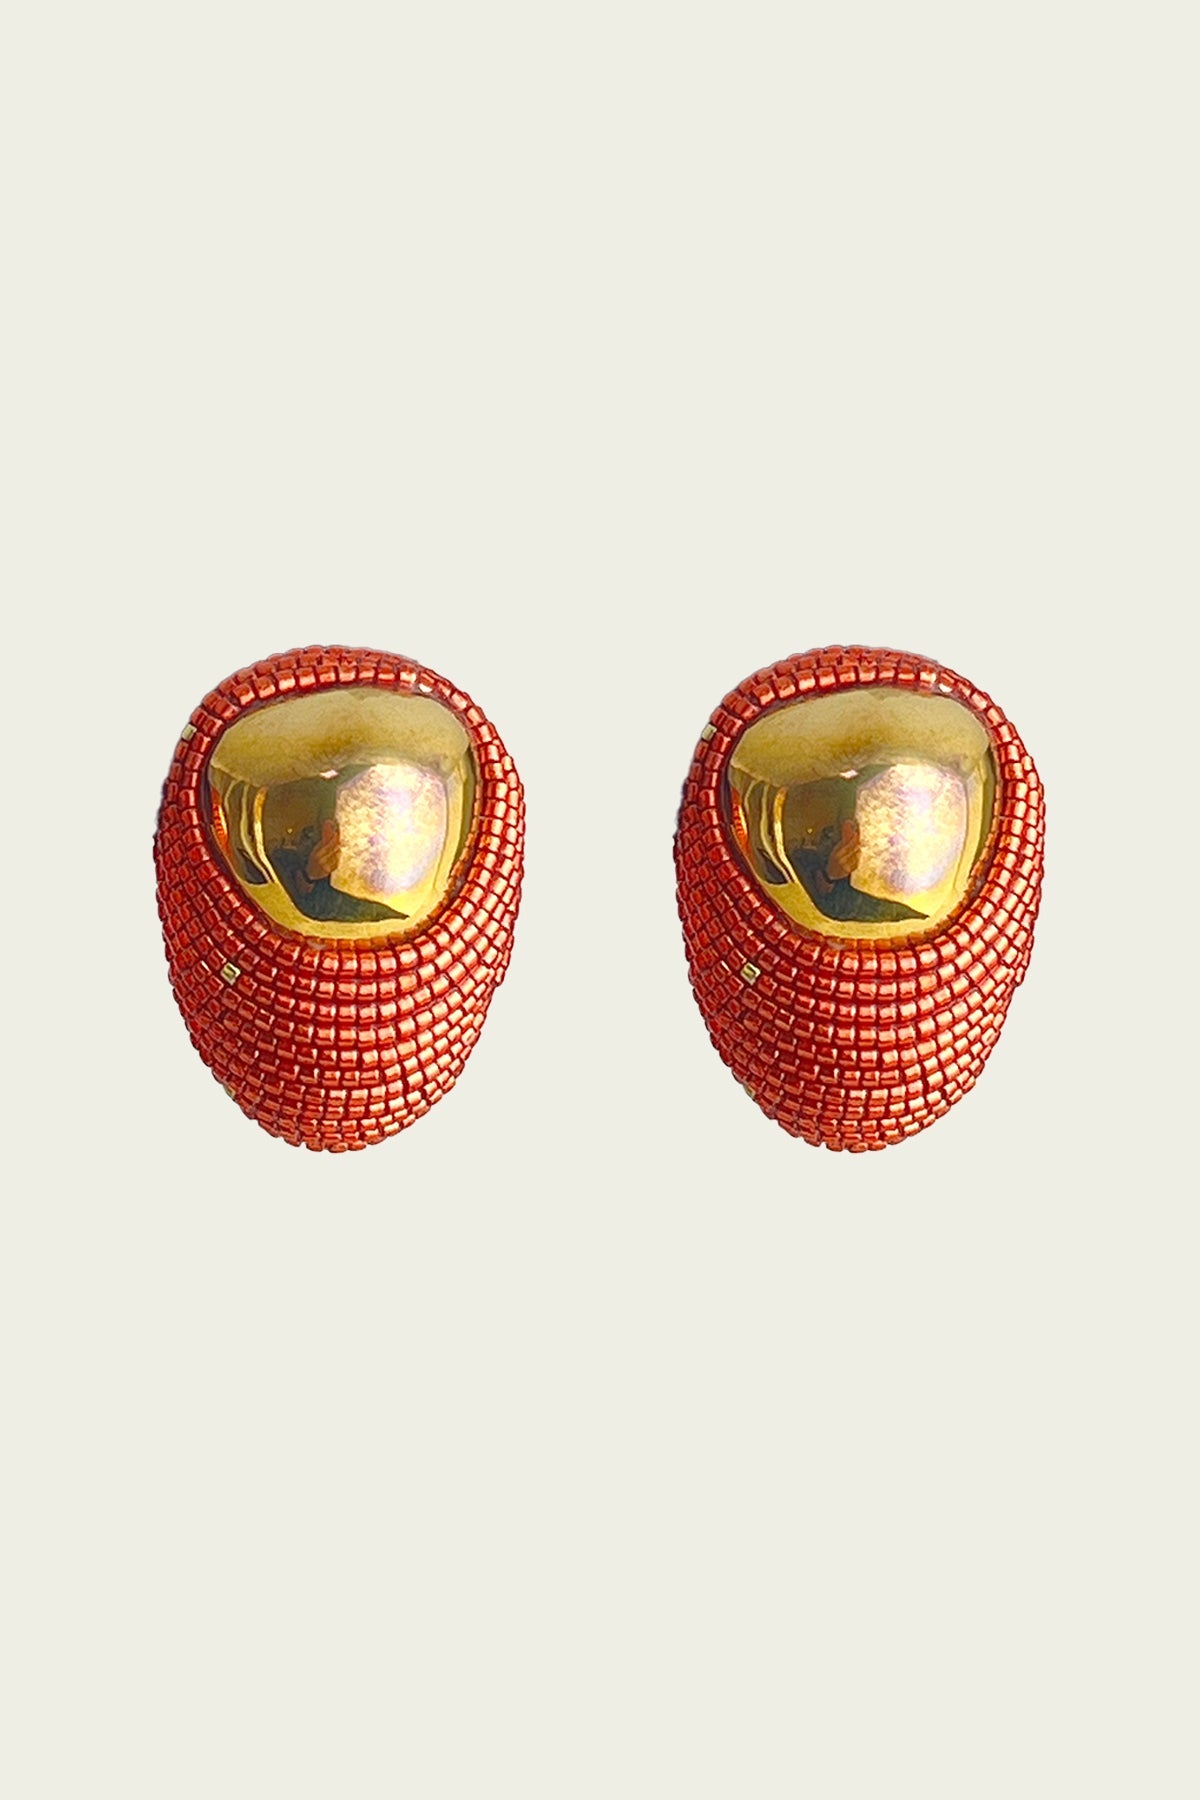 Mini Sole Earrings in Coral Red - shop-olivia.com